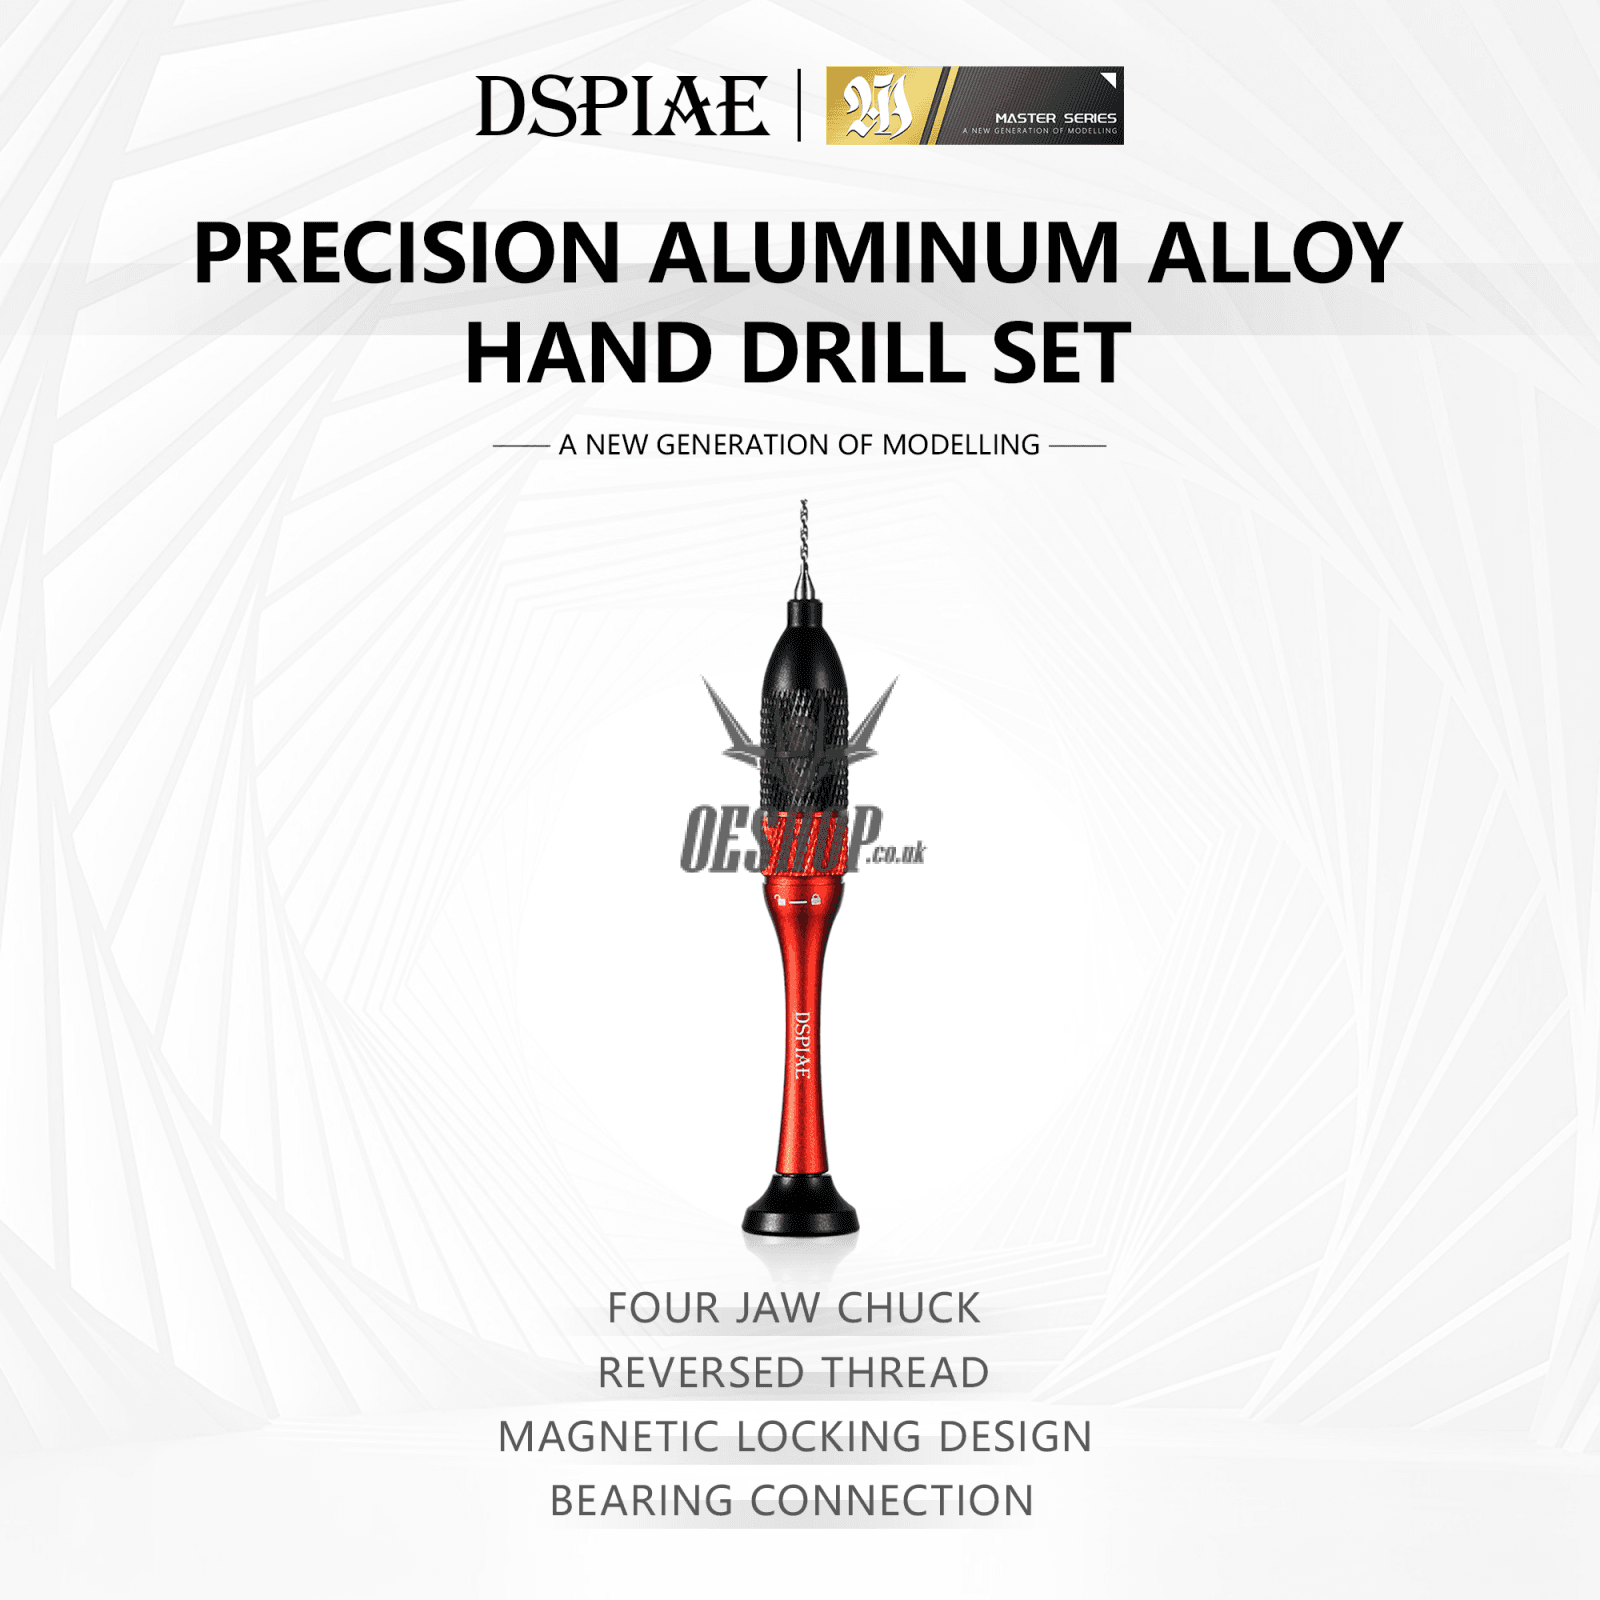 DSPIAE - AT-HD Aluminum Alloy Hand Drill